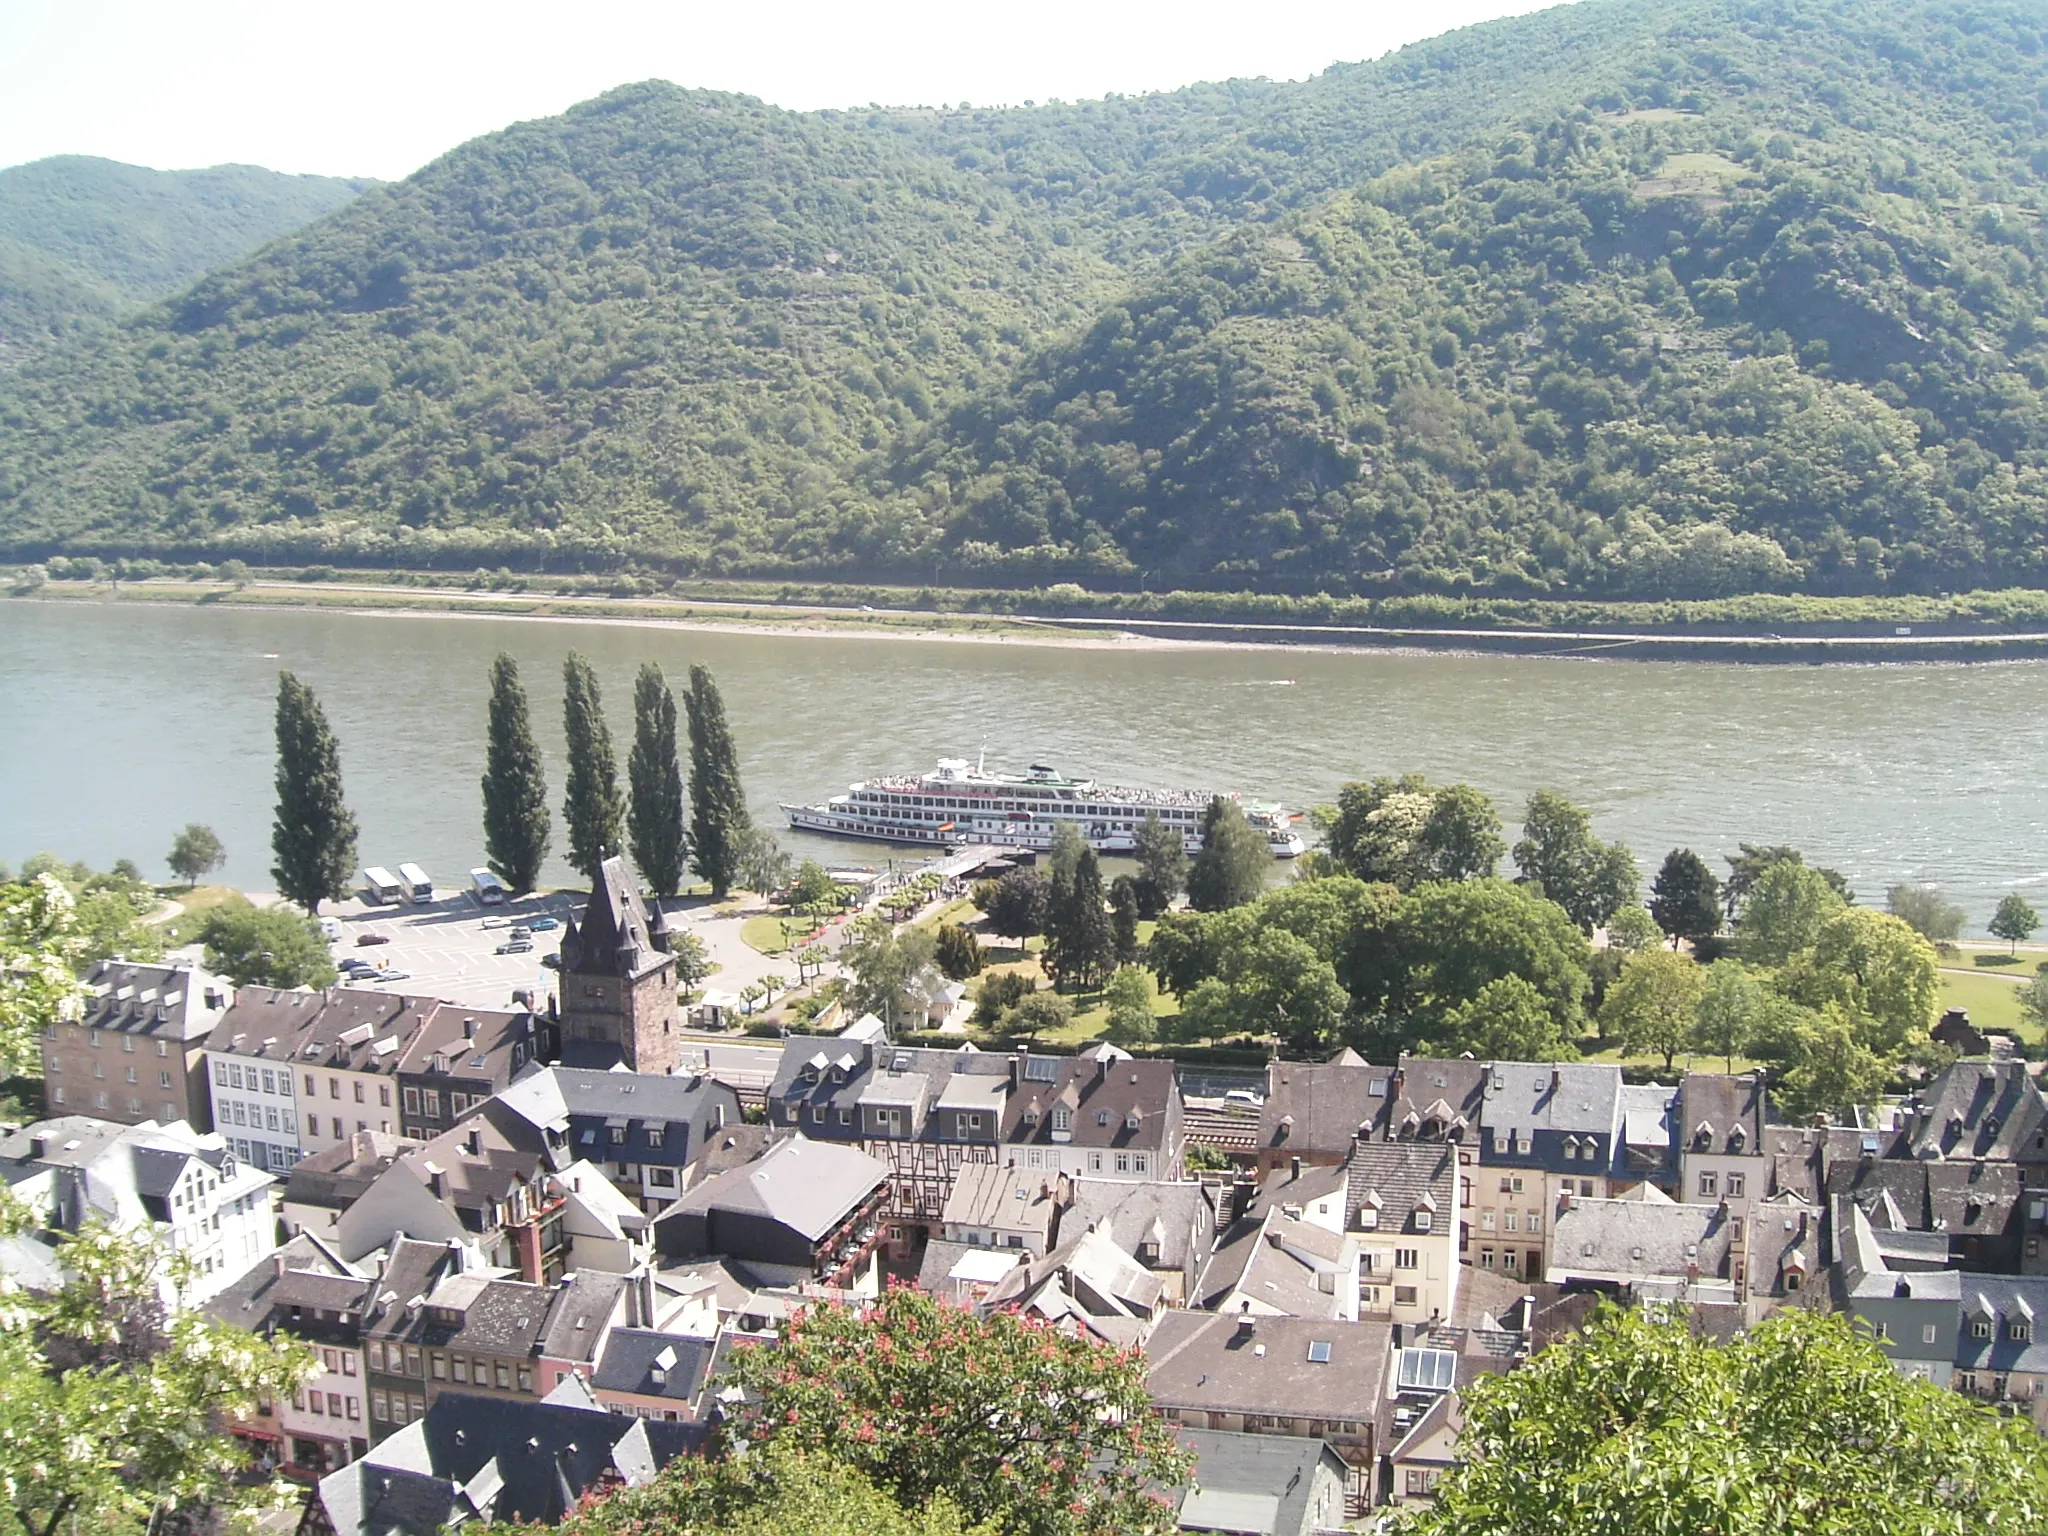 Photo showing: en:Bacharach, taken from en:Castle Stahleck, depicting a portion of the town, the en:Rhine and a passenger boat
Image created by Philip Hibbs on May 29th, 2004 and released into the public domain